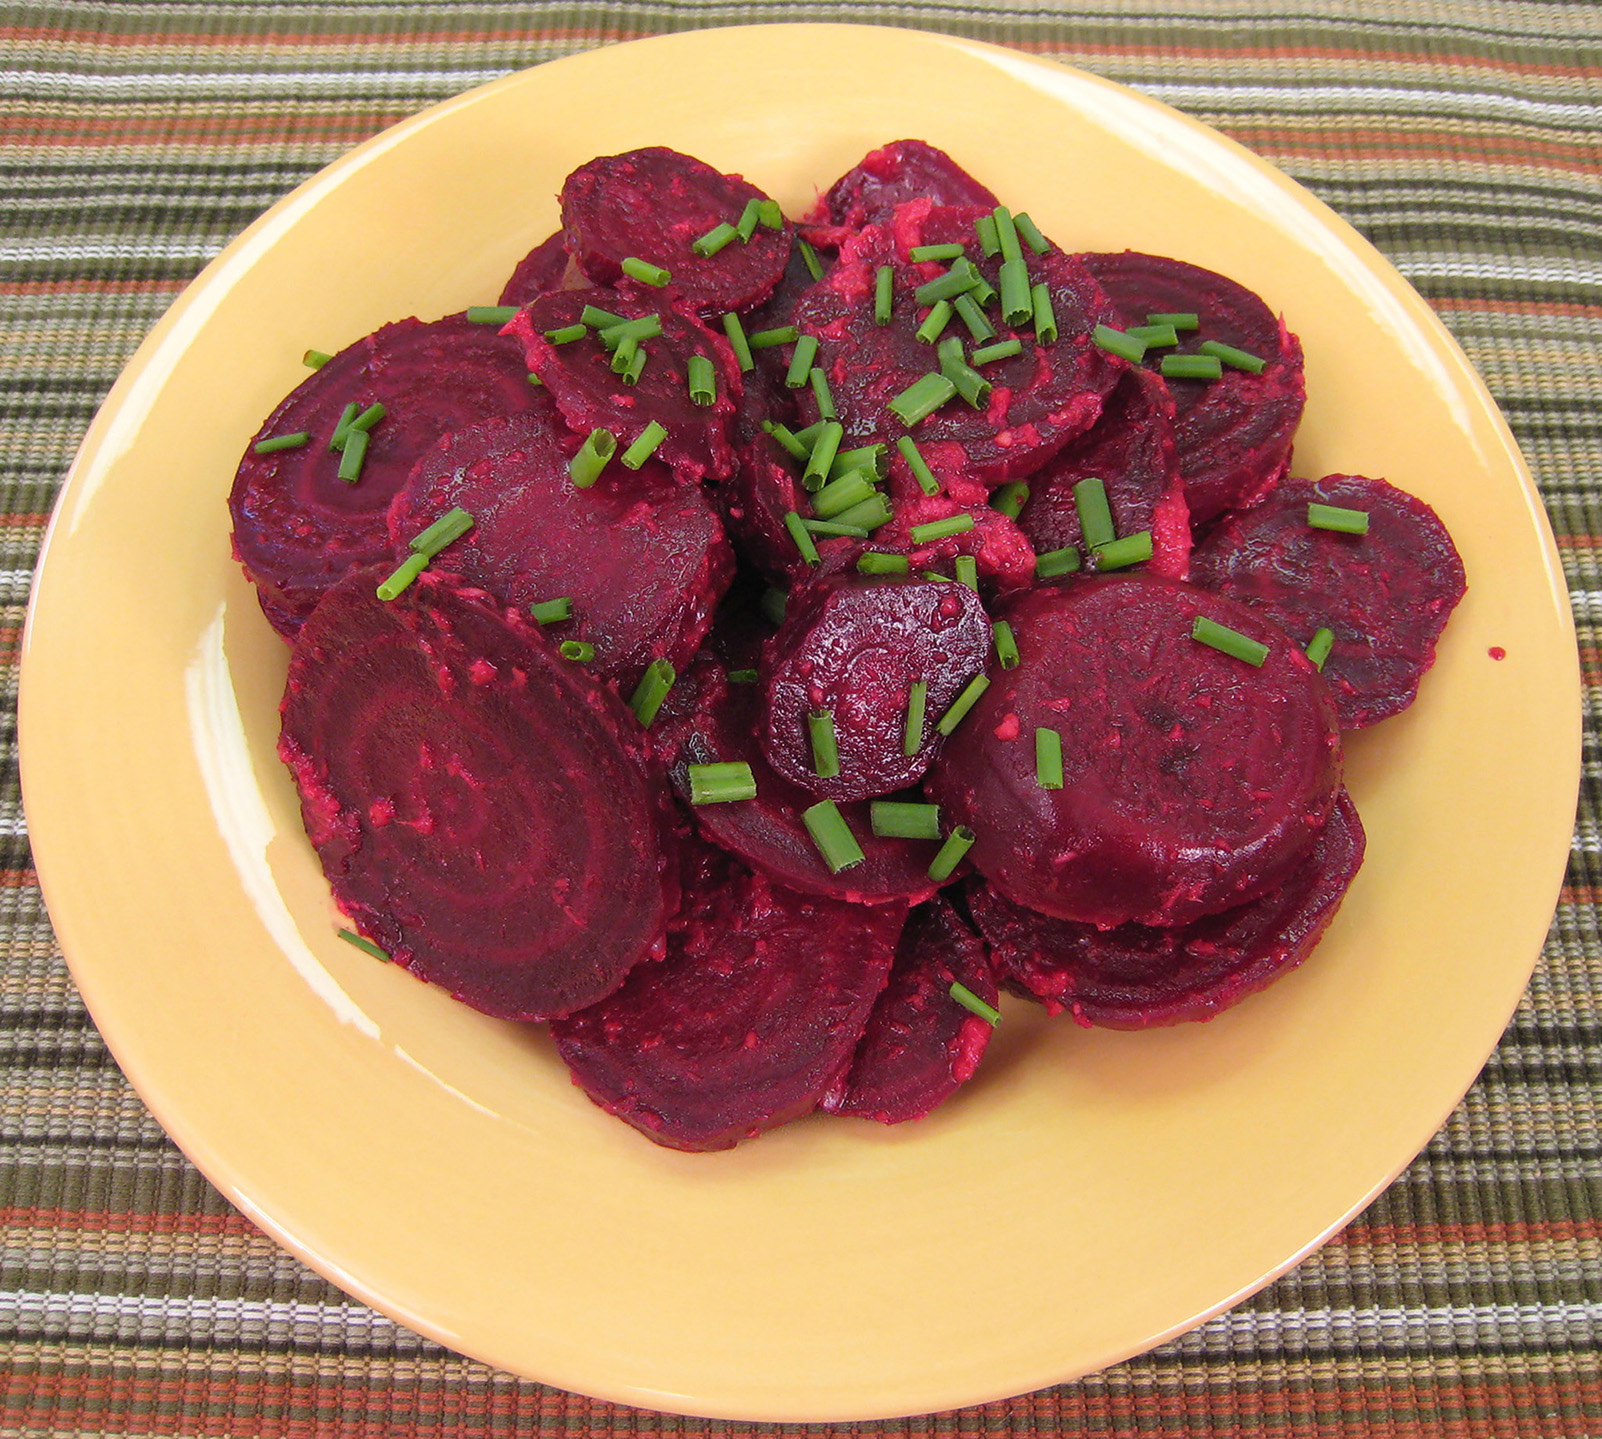 Zesty beets served on a plate, garnished with chives.